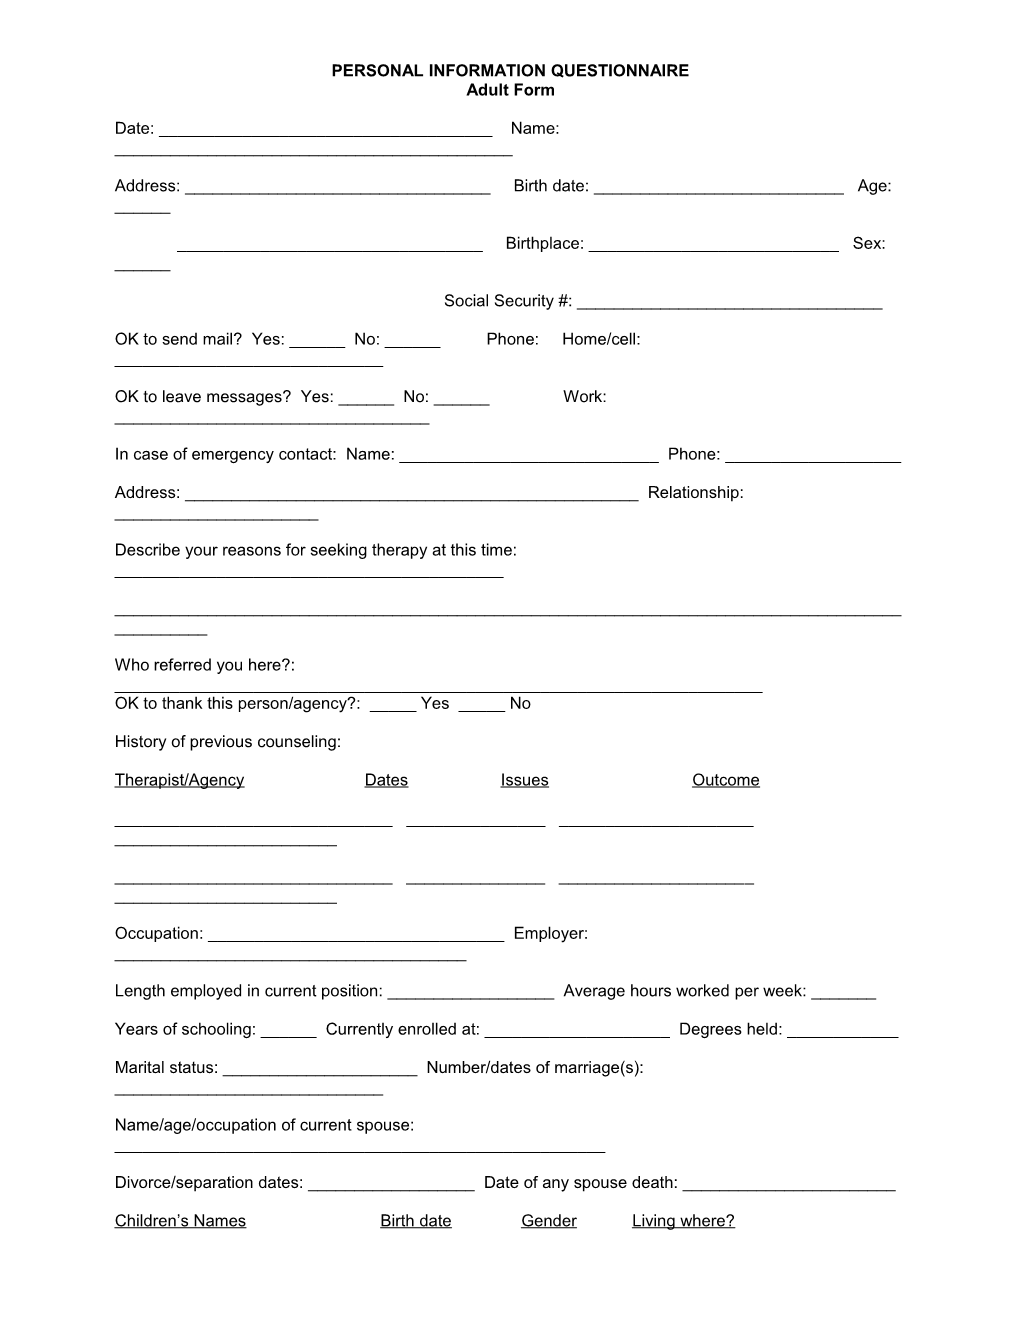 Personal Information Questionnaire